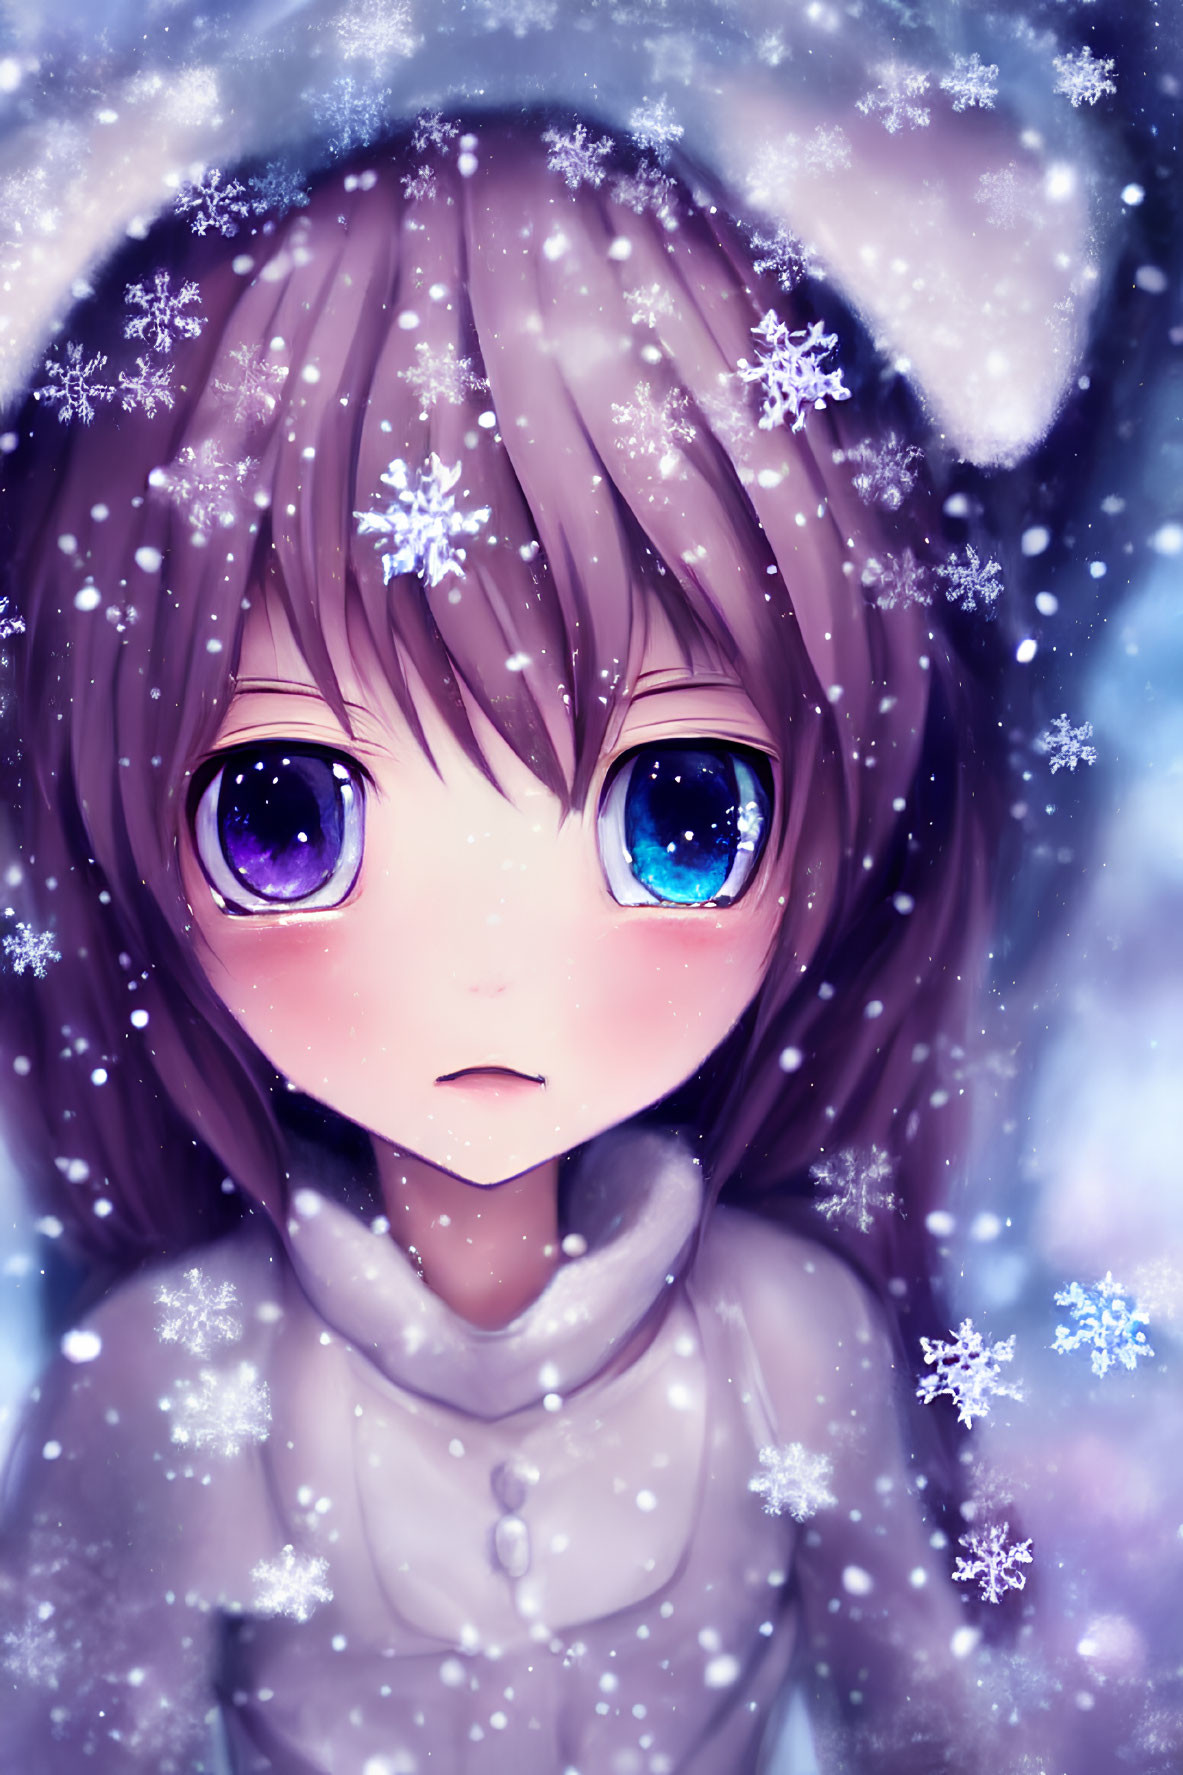 Detailed Anime Girl Illustration with Large Purple Eyes in Snowy Scene